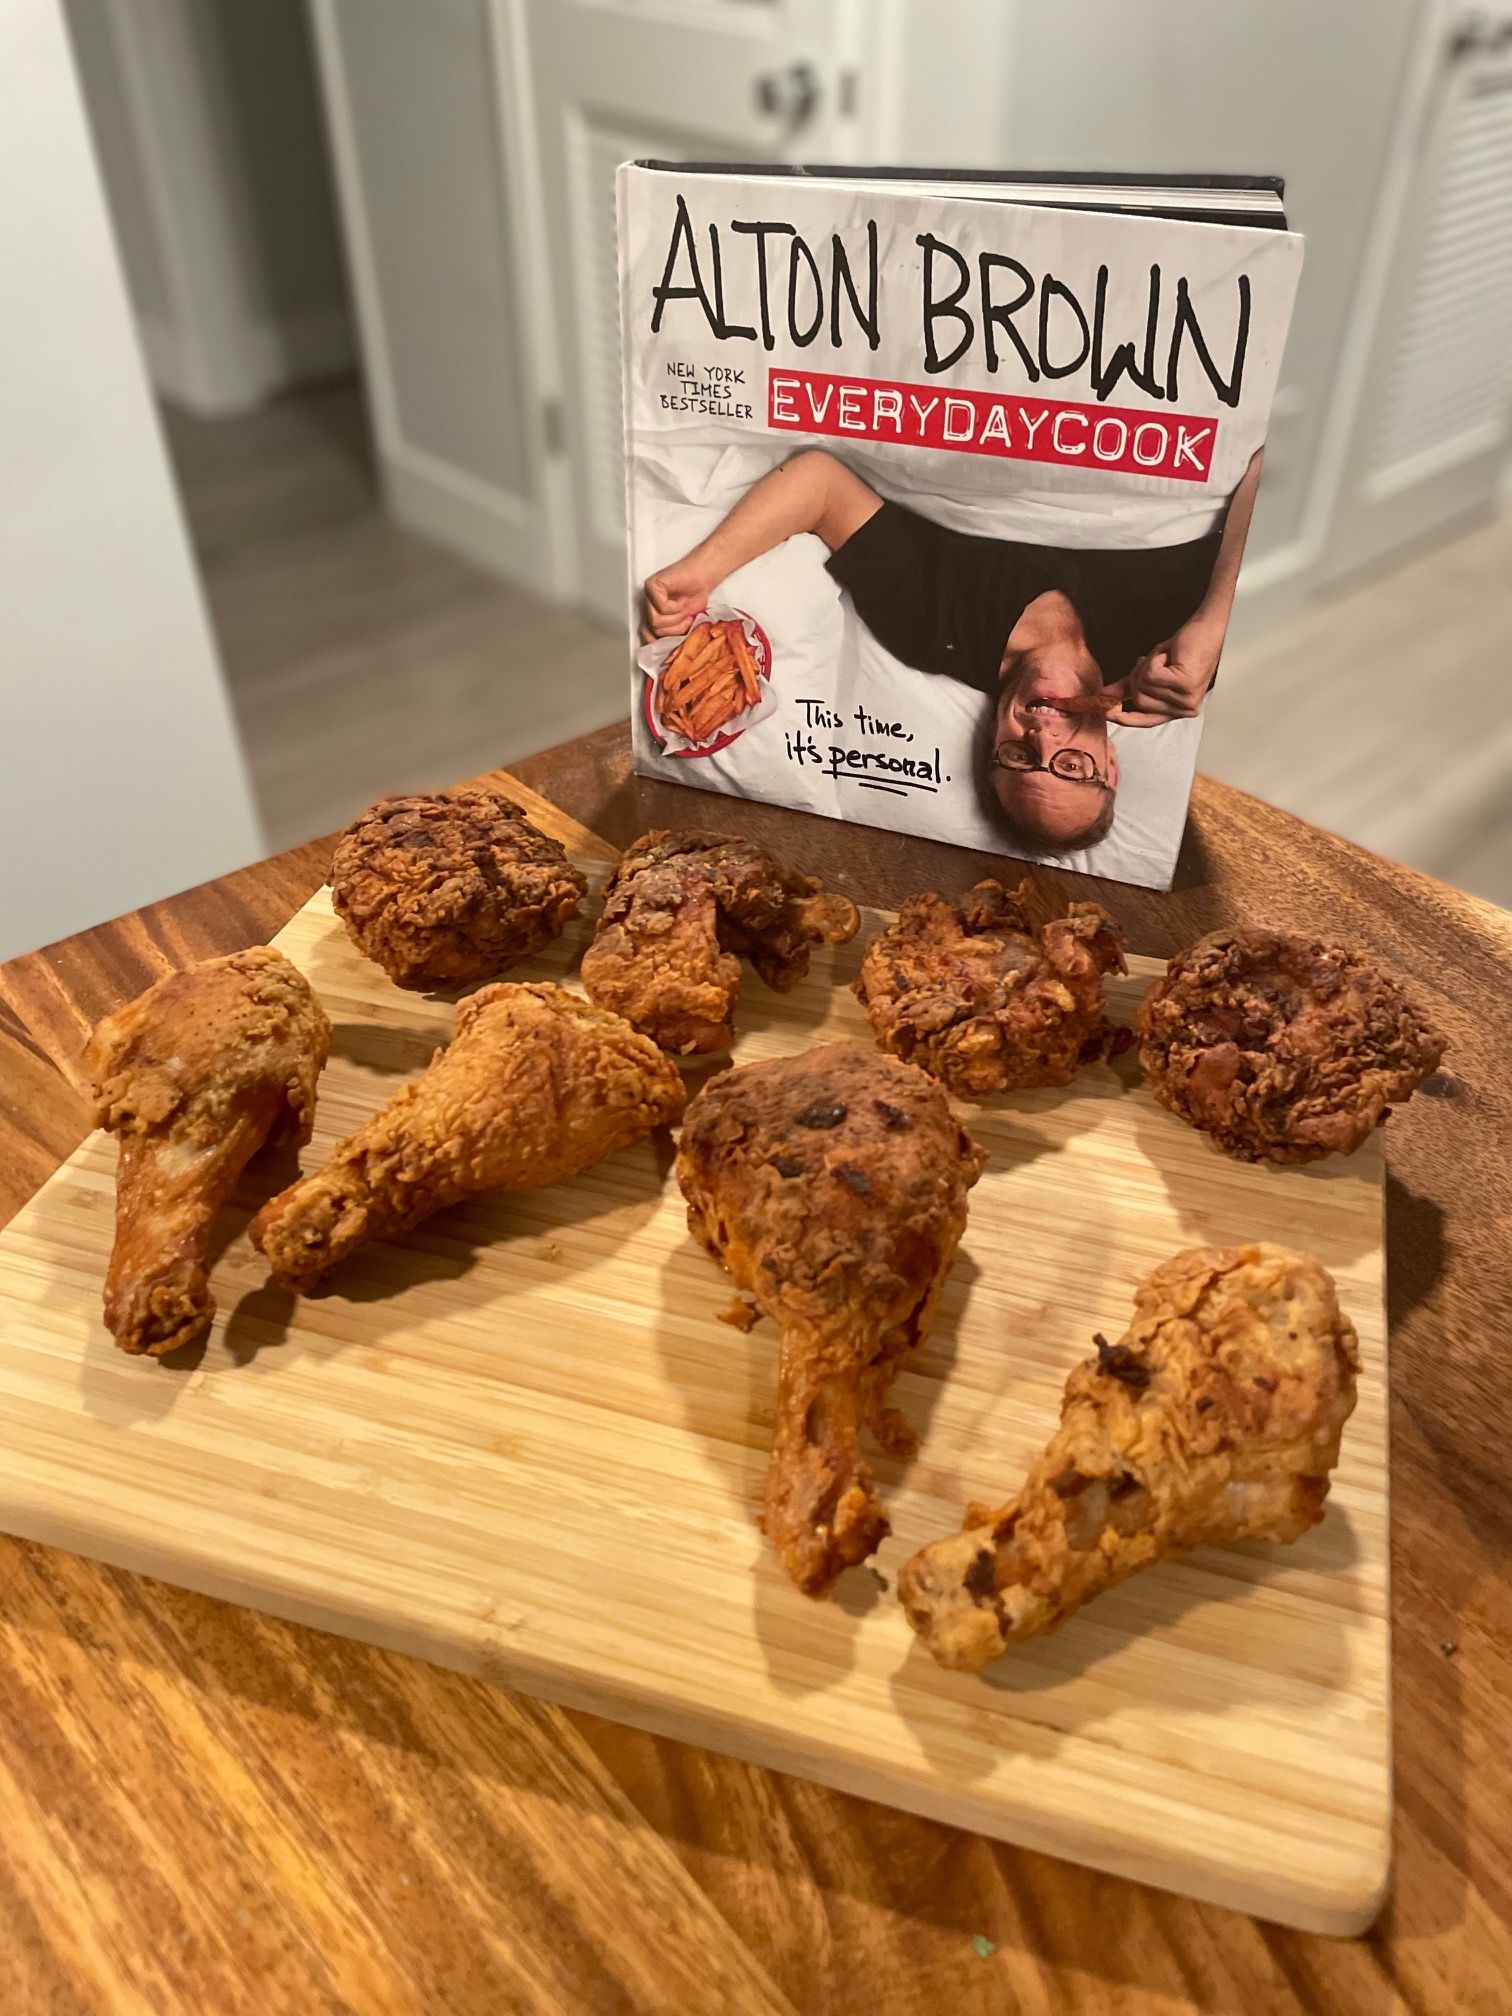 Fried chicken thighs and legs sit on a wooden cutting board in front of the cookbook EveryDayCook by Alton Brown